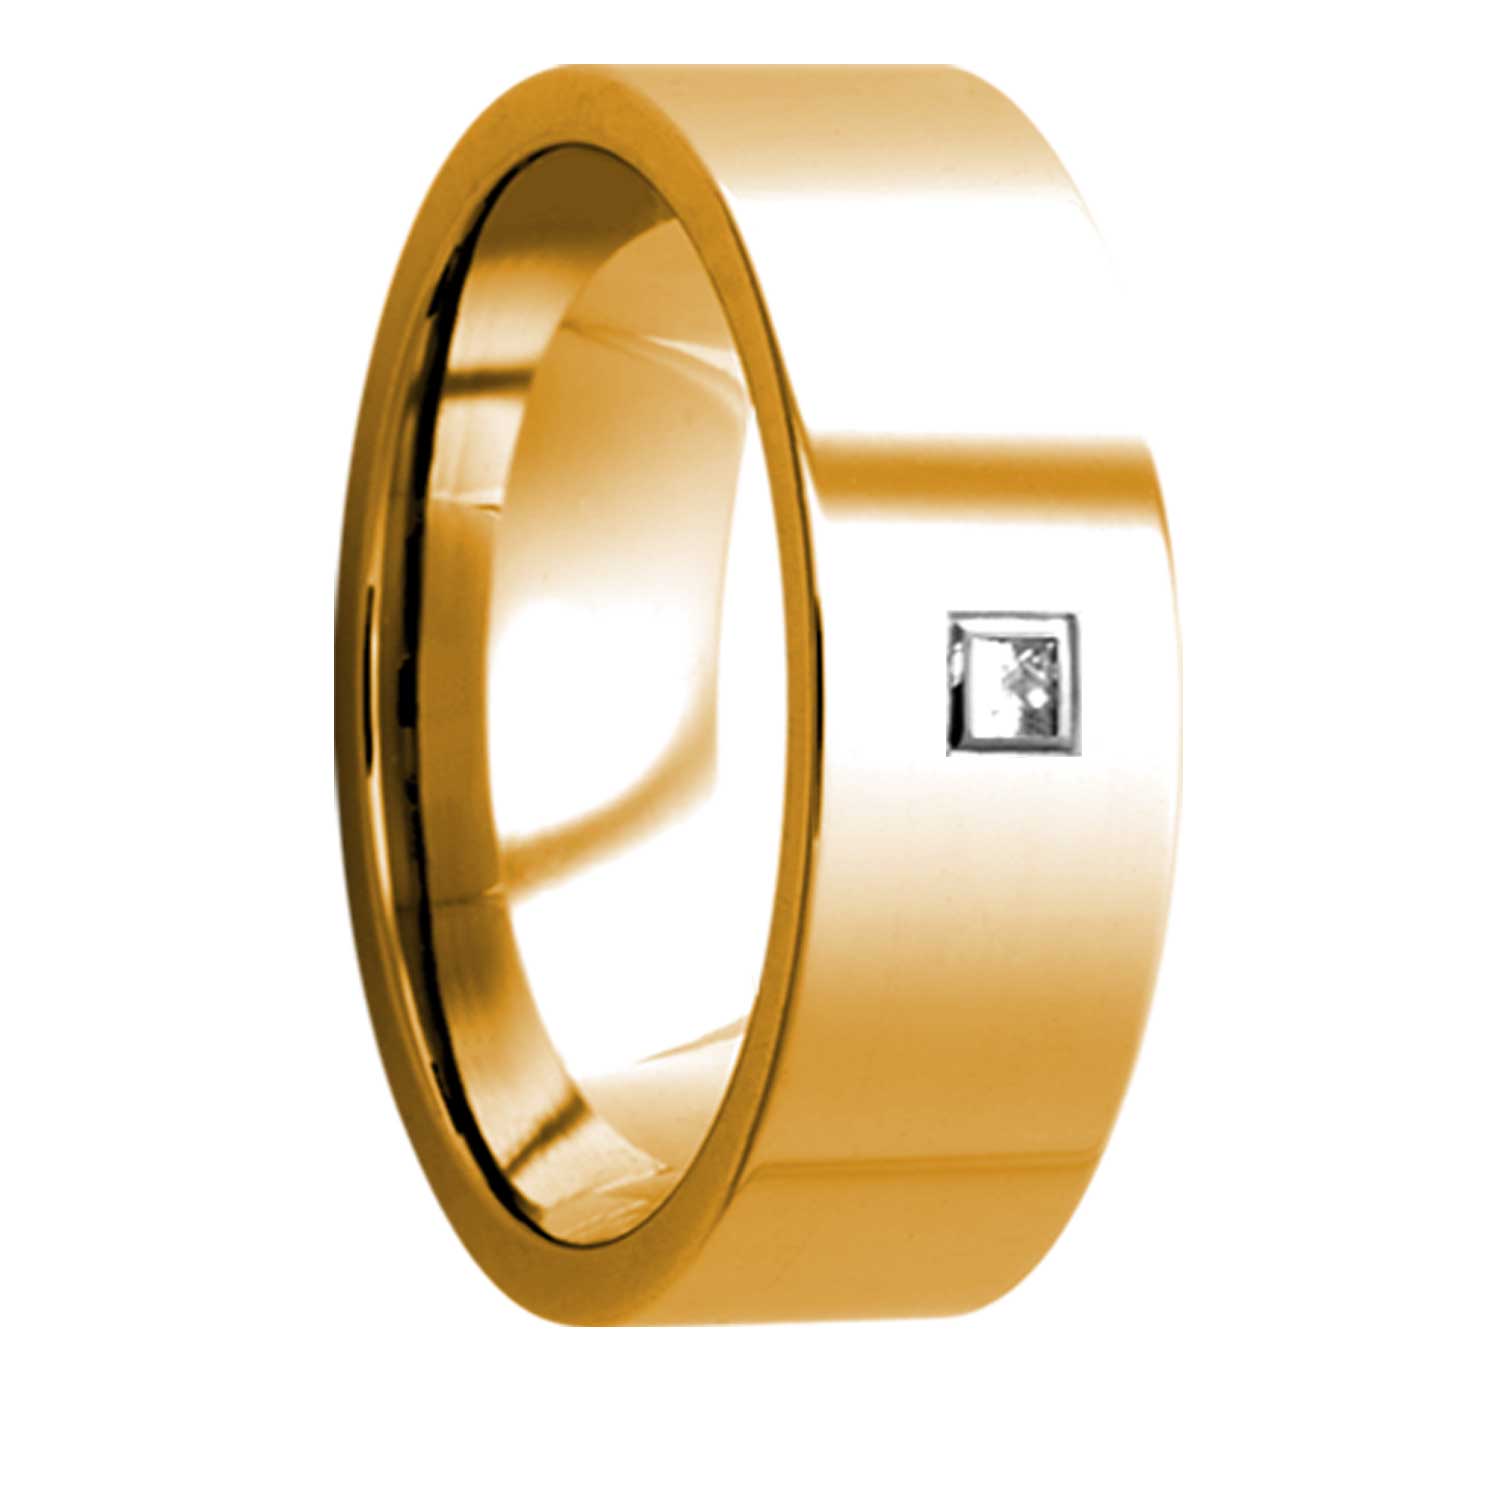 A 14k gold wedding band with square diamond displayed on a neutral white background.